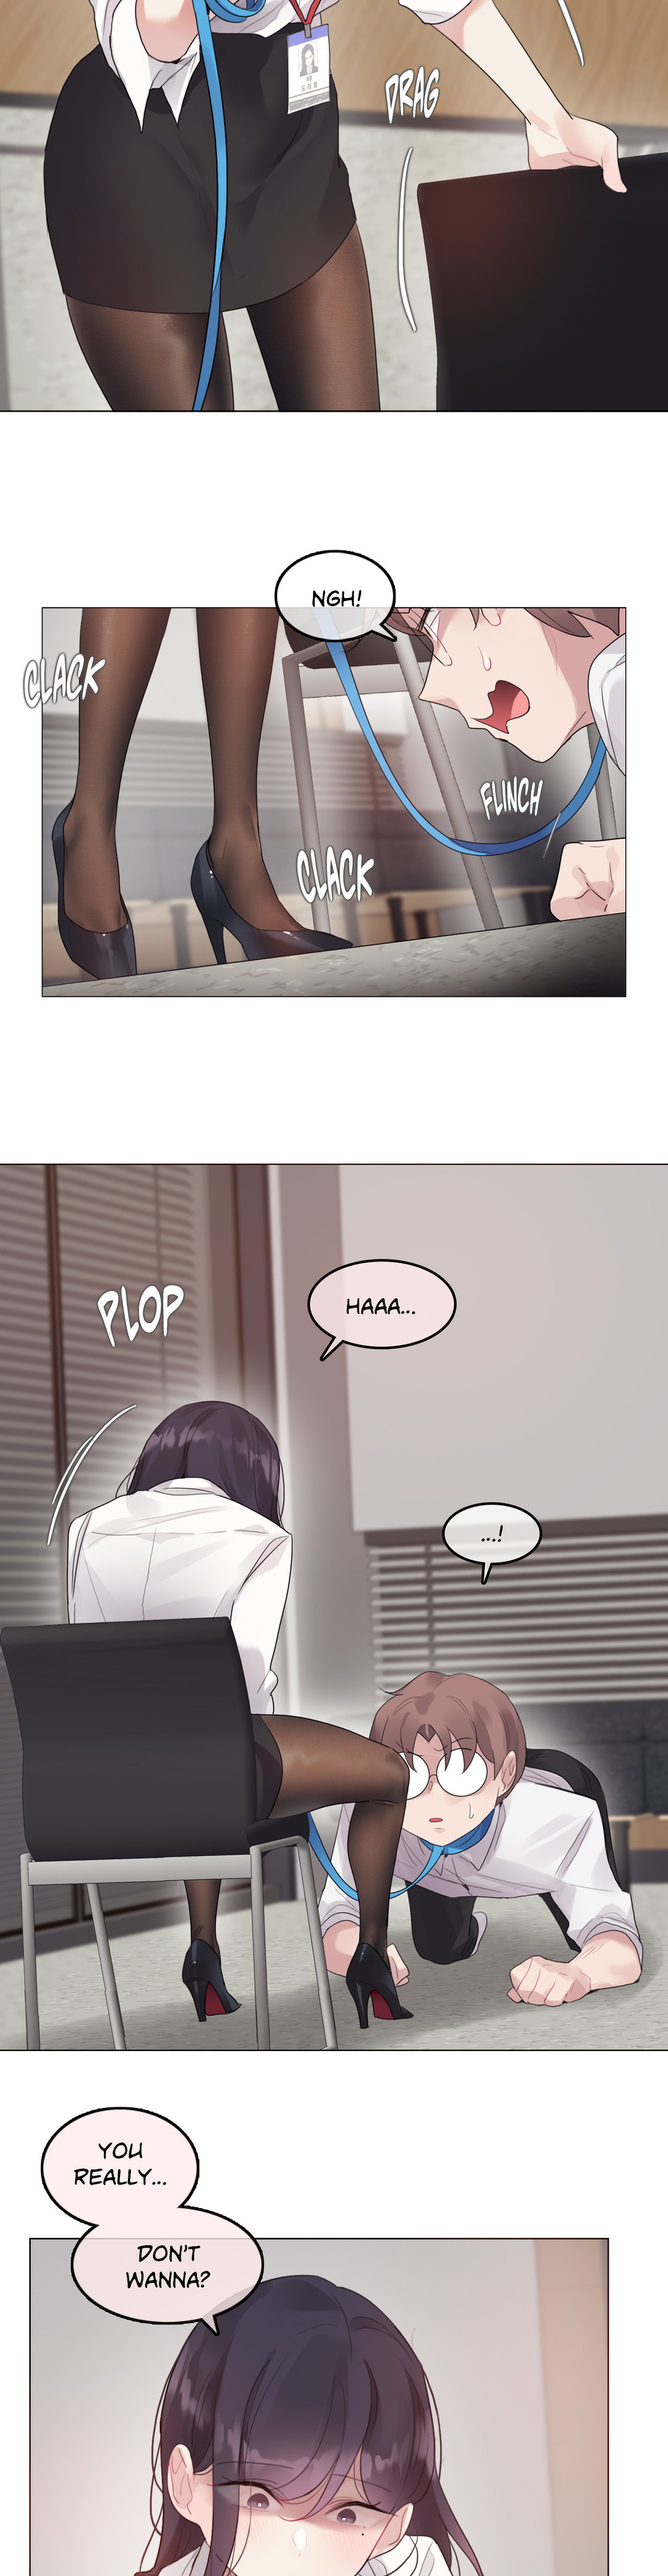 A Pervert’s Daily Life - Chapter 138 Page 2